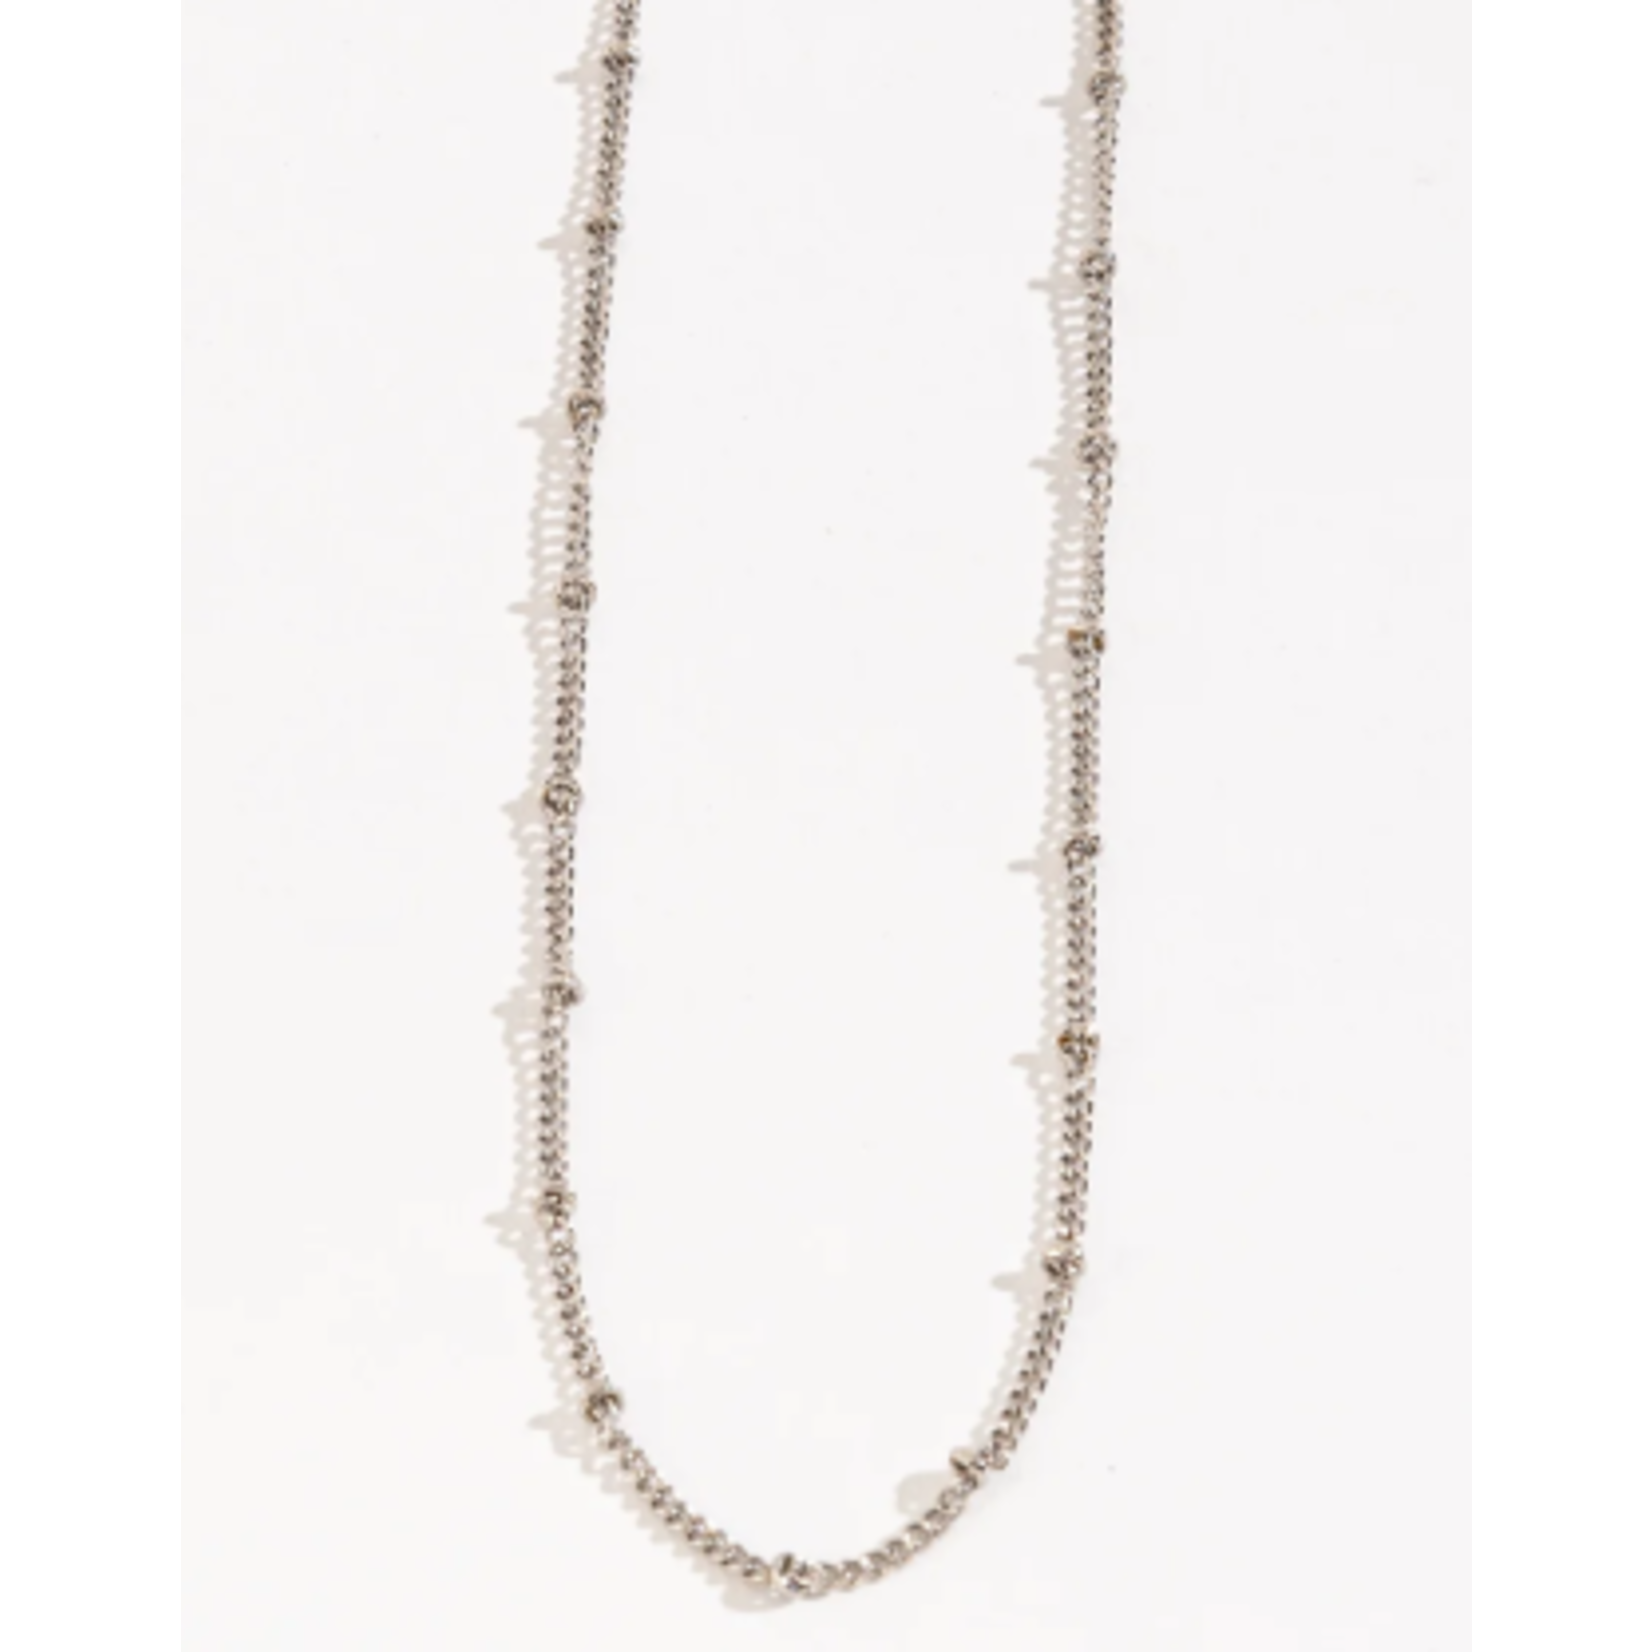 Howards Layer Me 16 in 3mm Bead Chain Necklace Silver